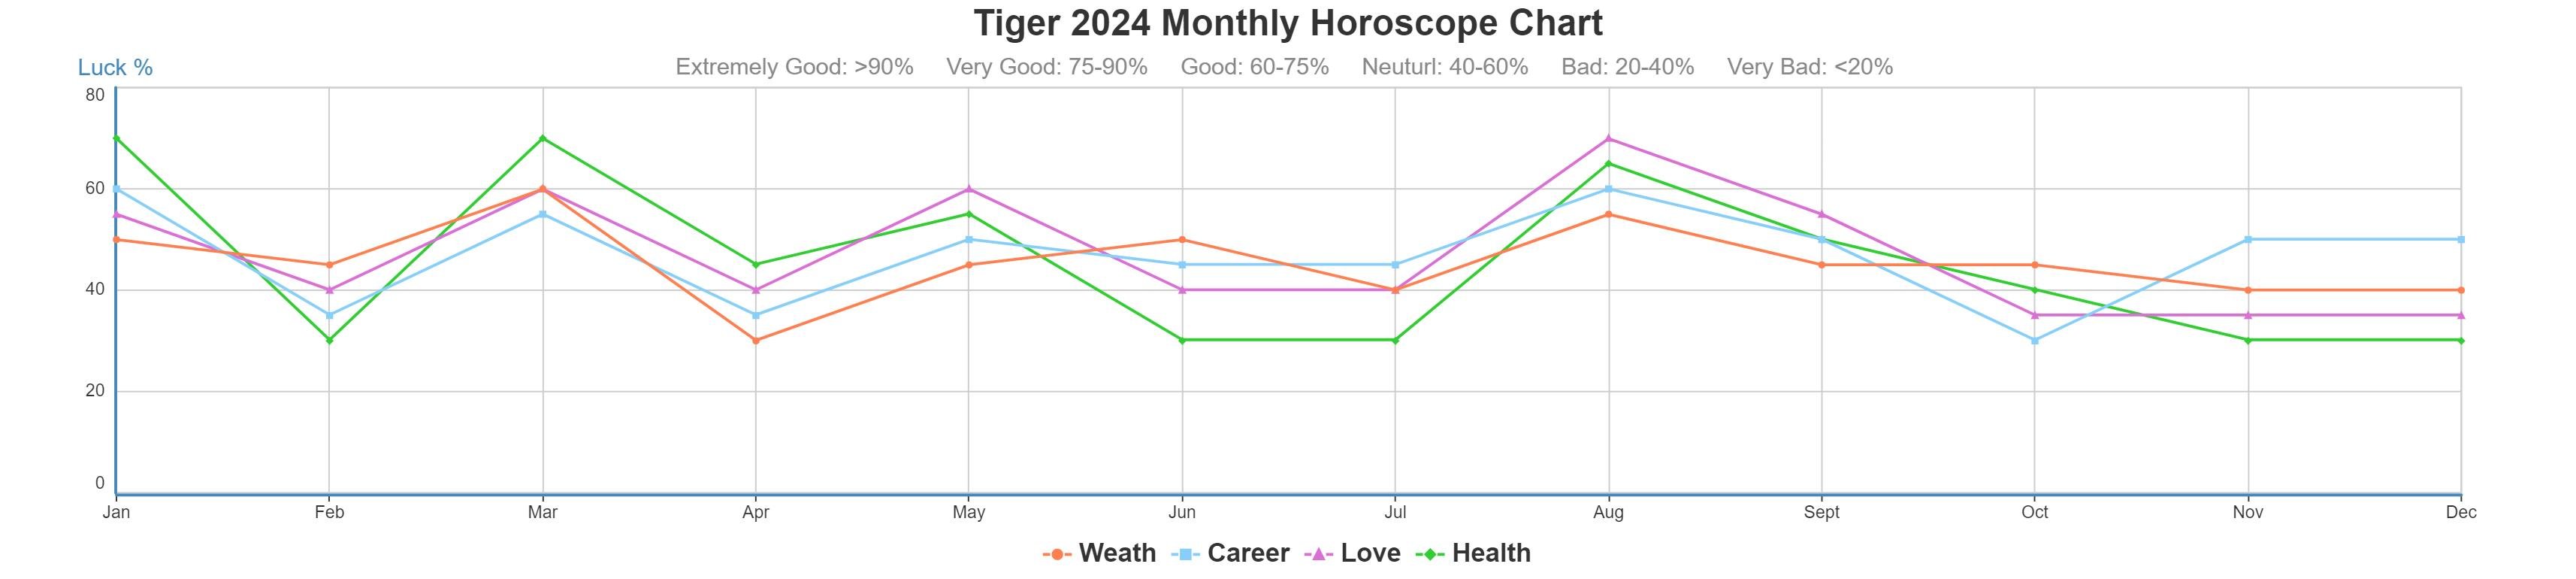 Tiger 2024 monthly horoscope